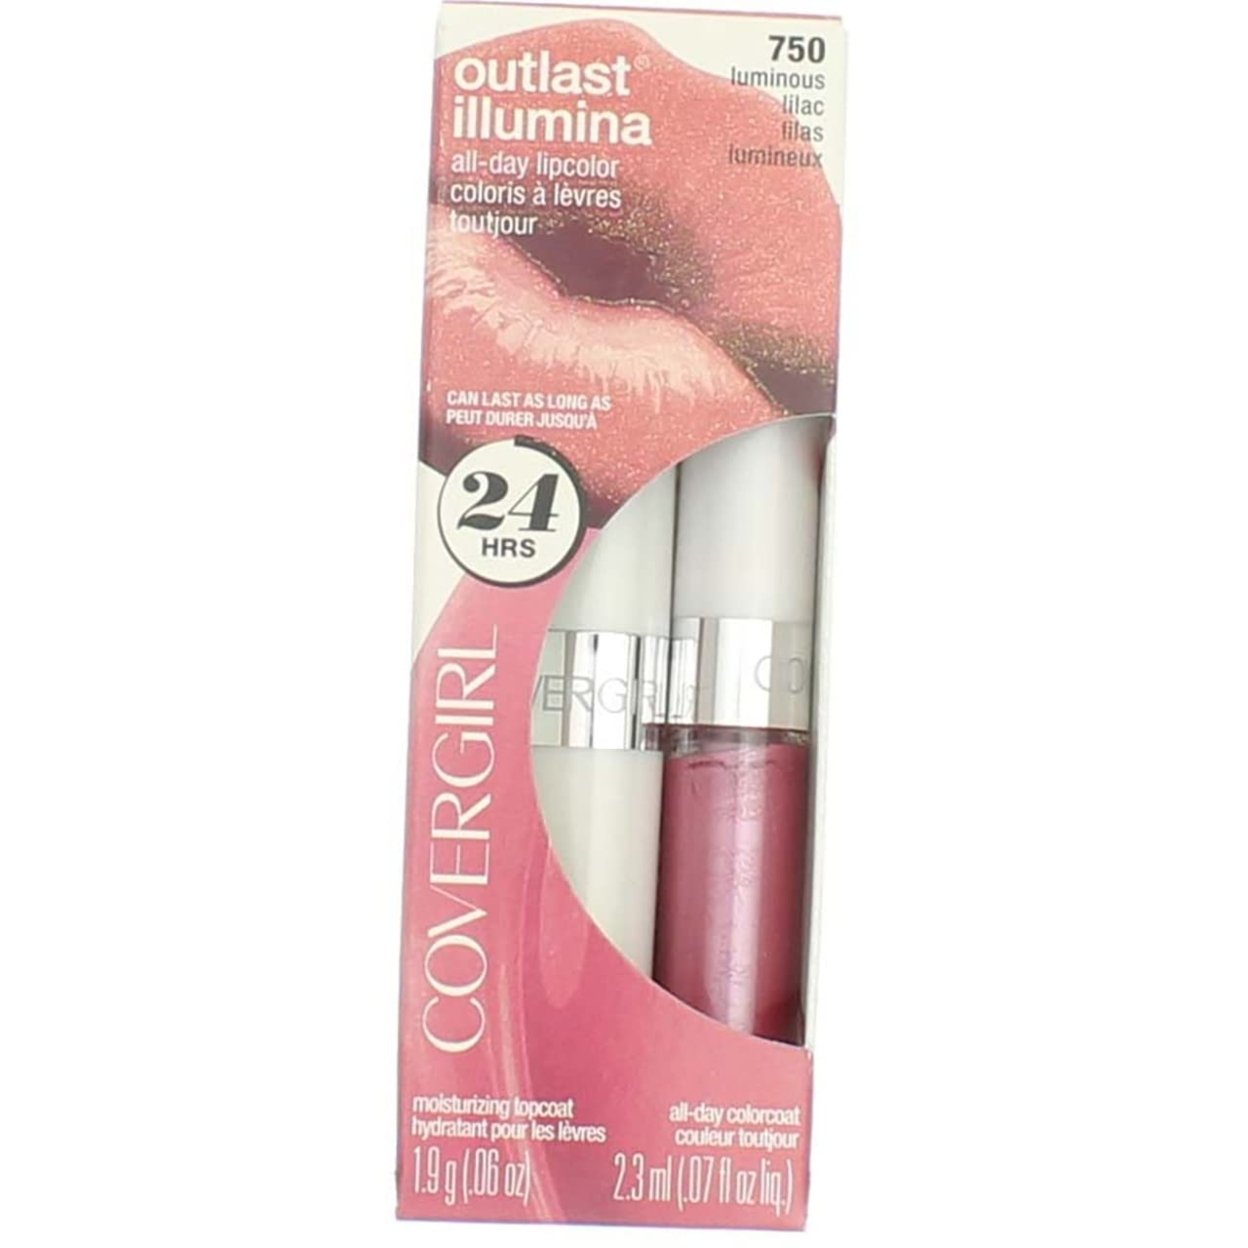 CoverGirl Outlast All Day Lipcolor, Luminous Lilac [750] 1 Ea